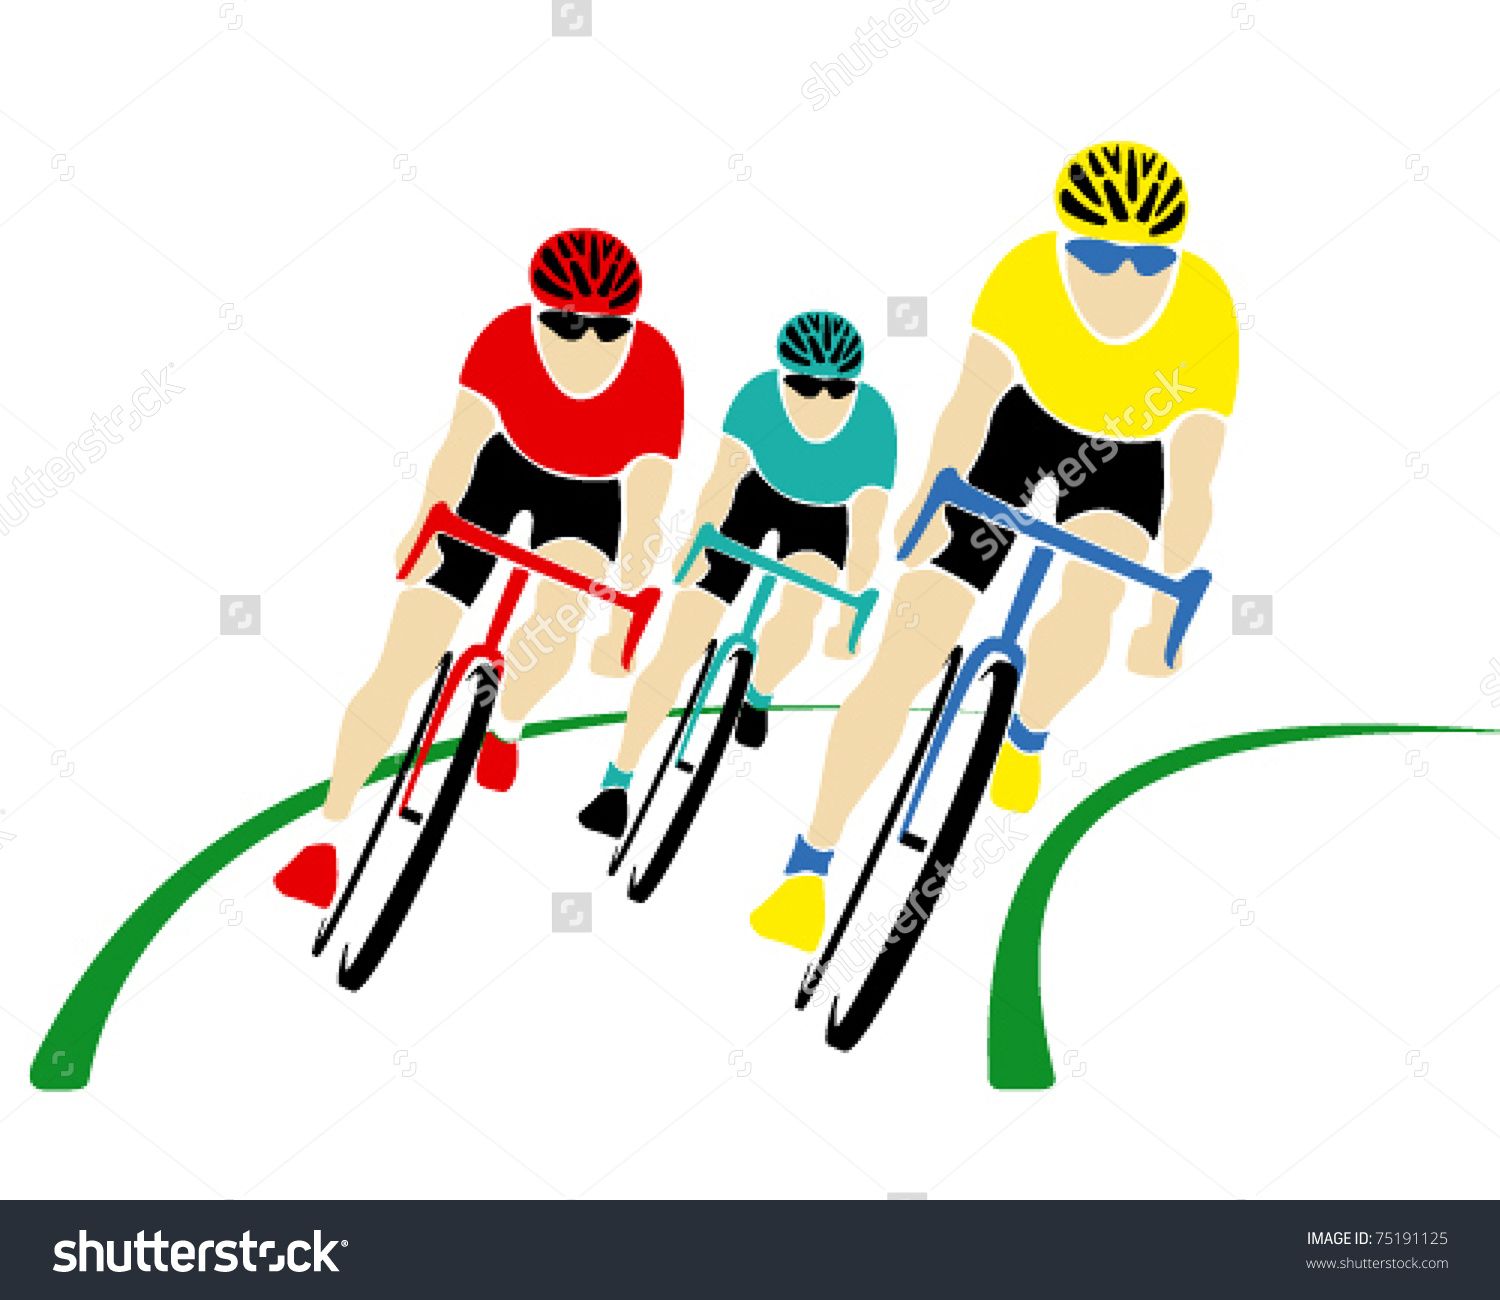 cycling clipart cycling team